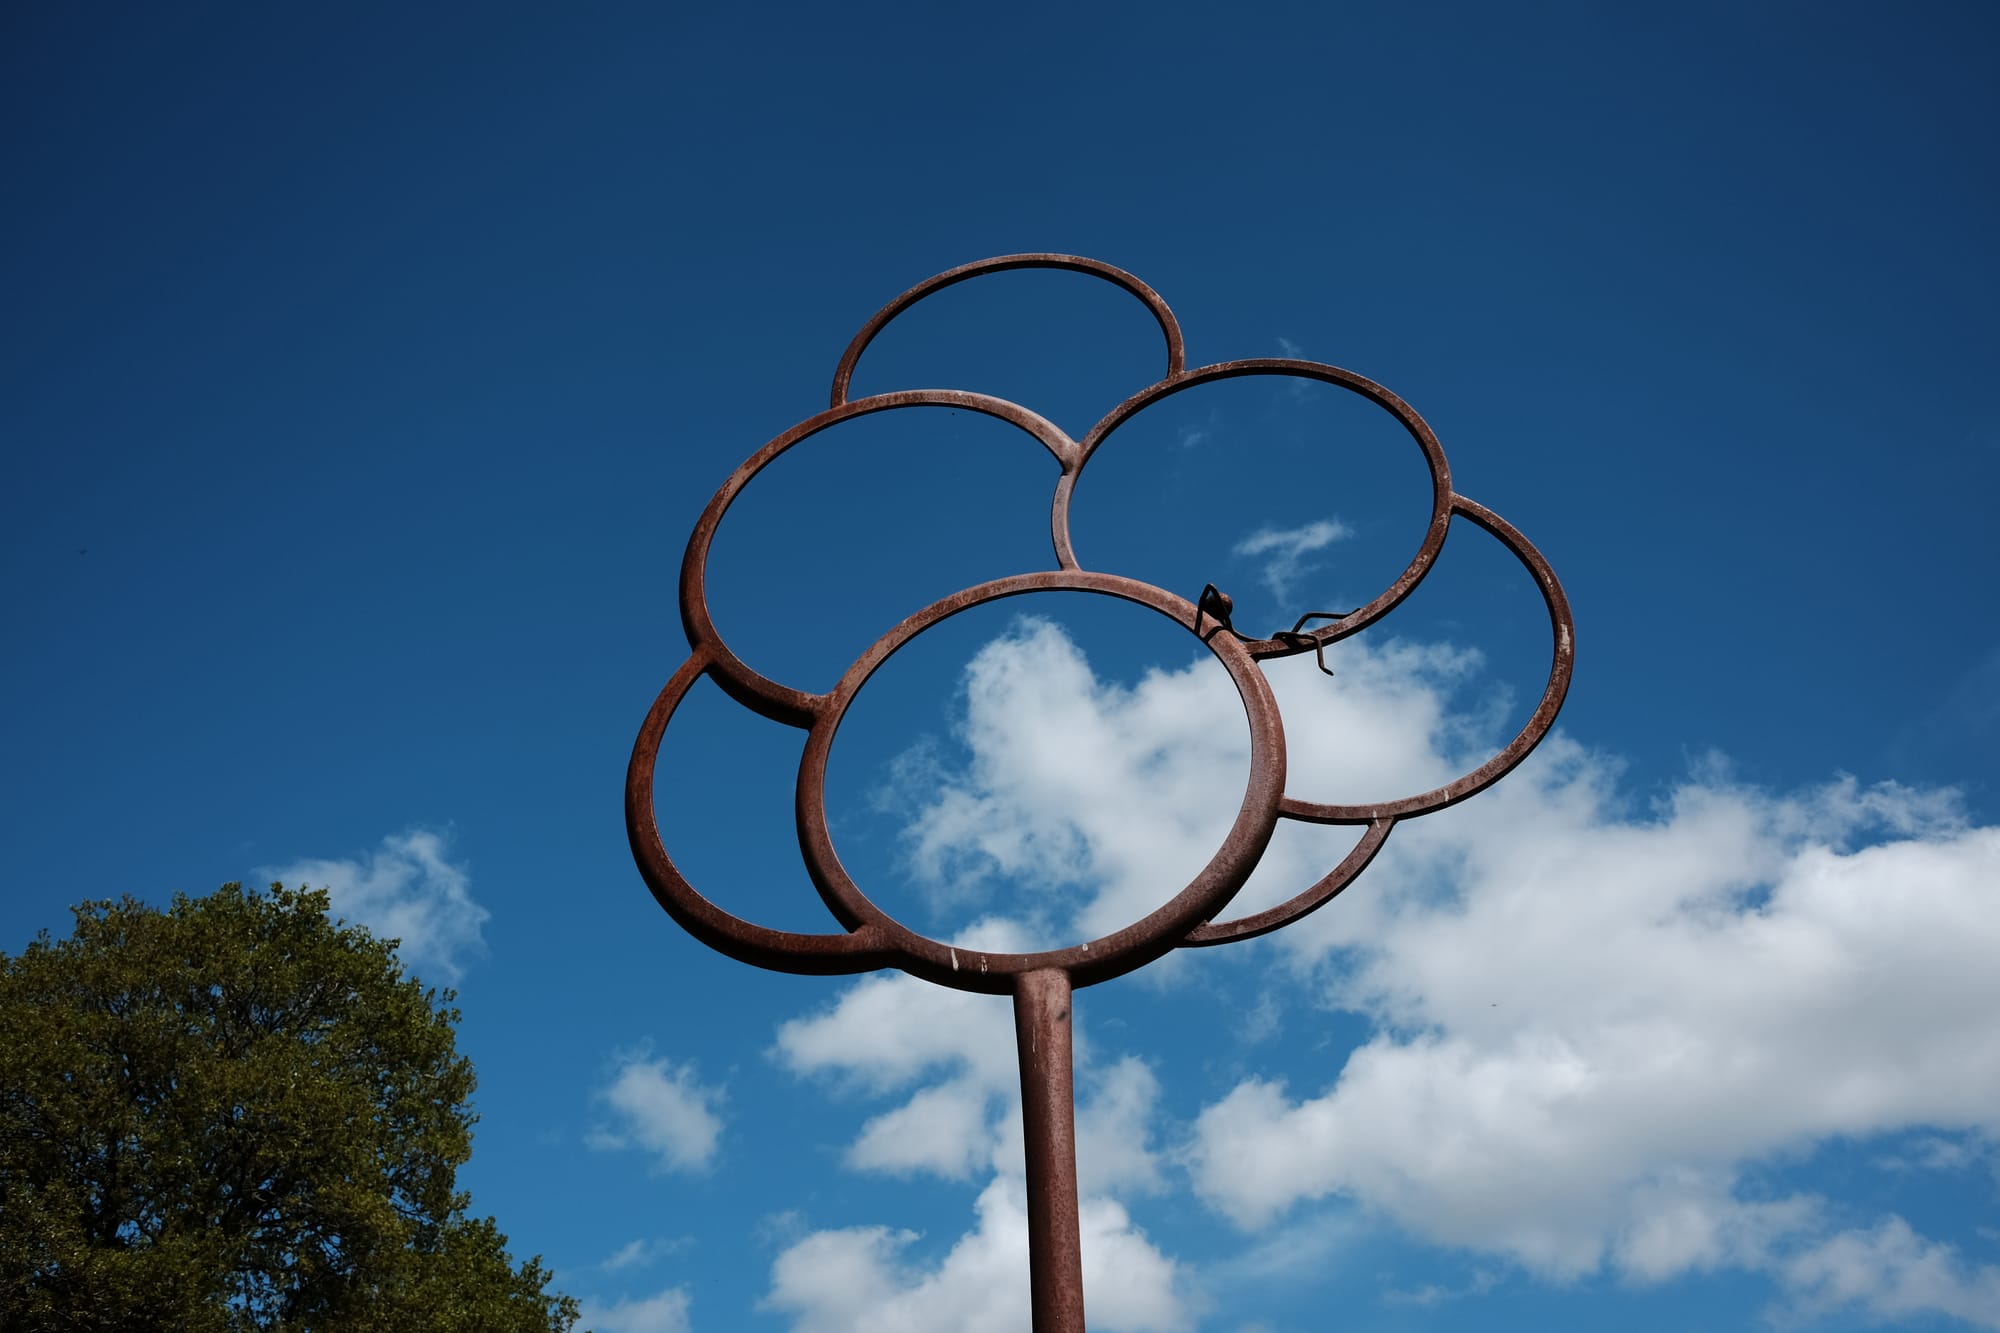 A rusty brown geometric sculpture comprised of interlocking circles – a human figure laying in one of them – is pictured against a blue sky